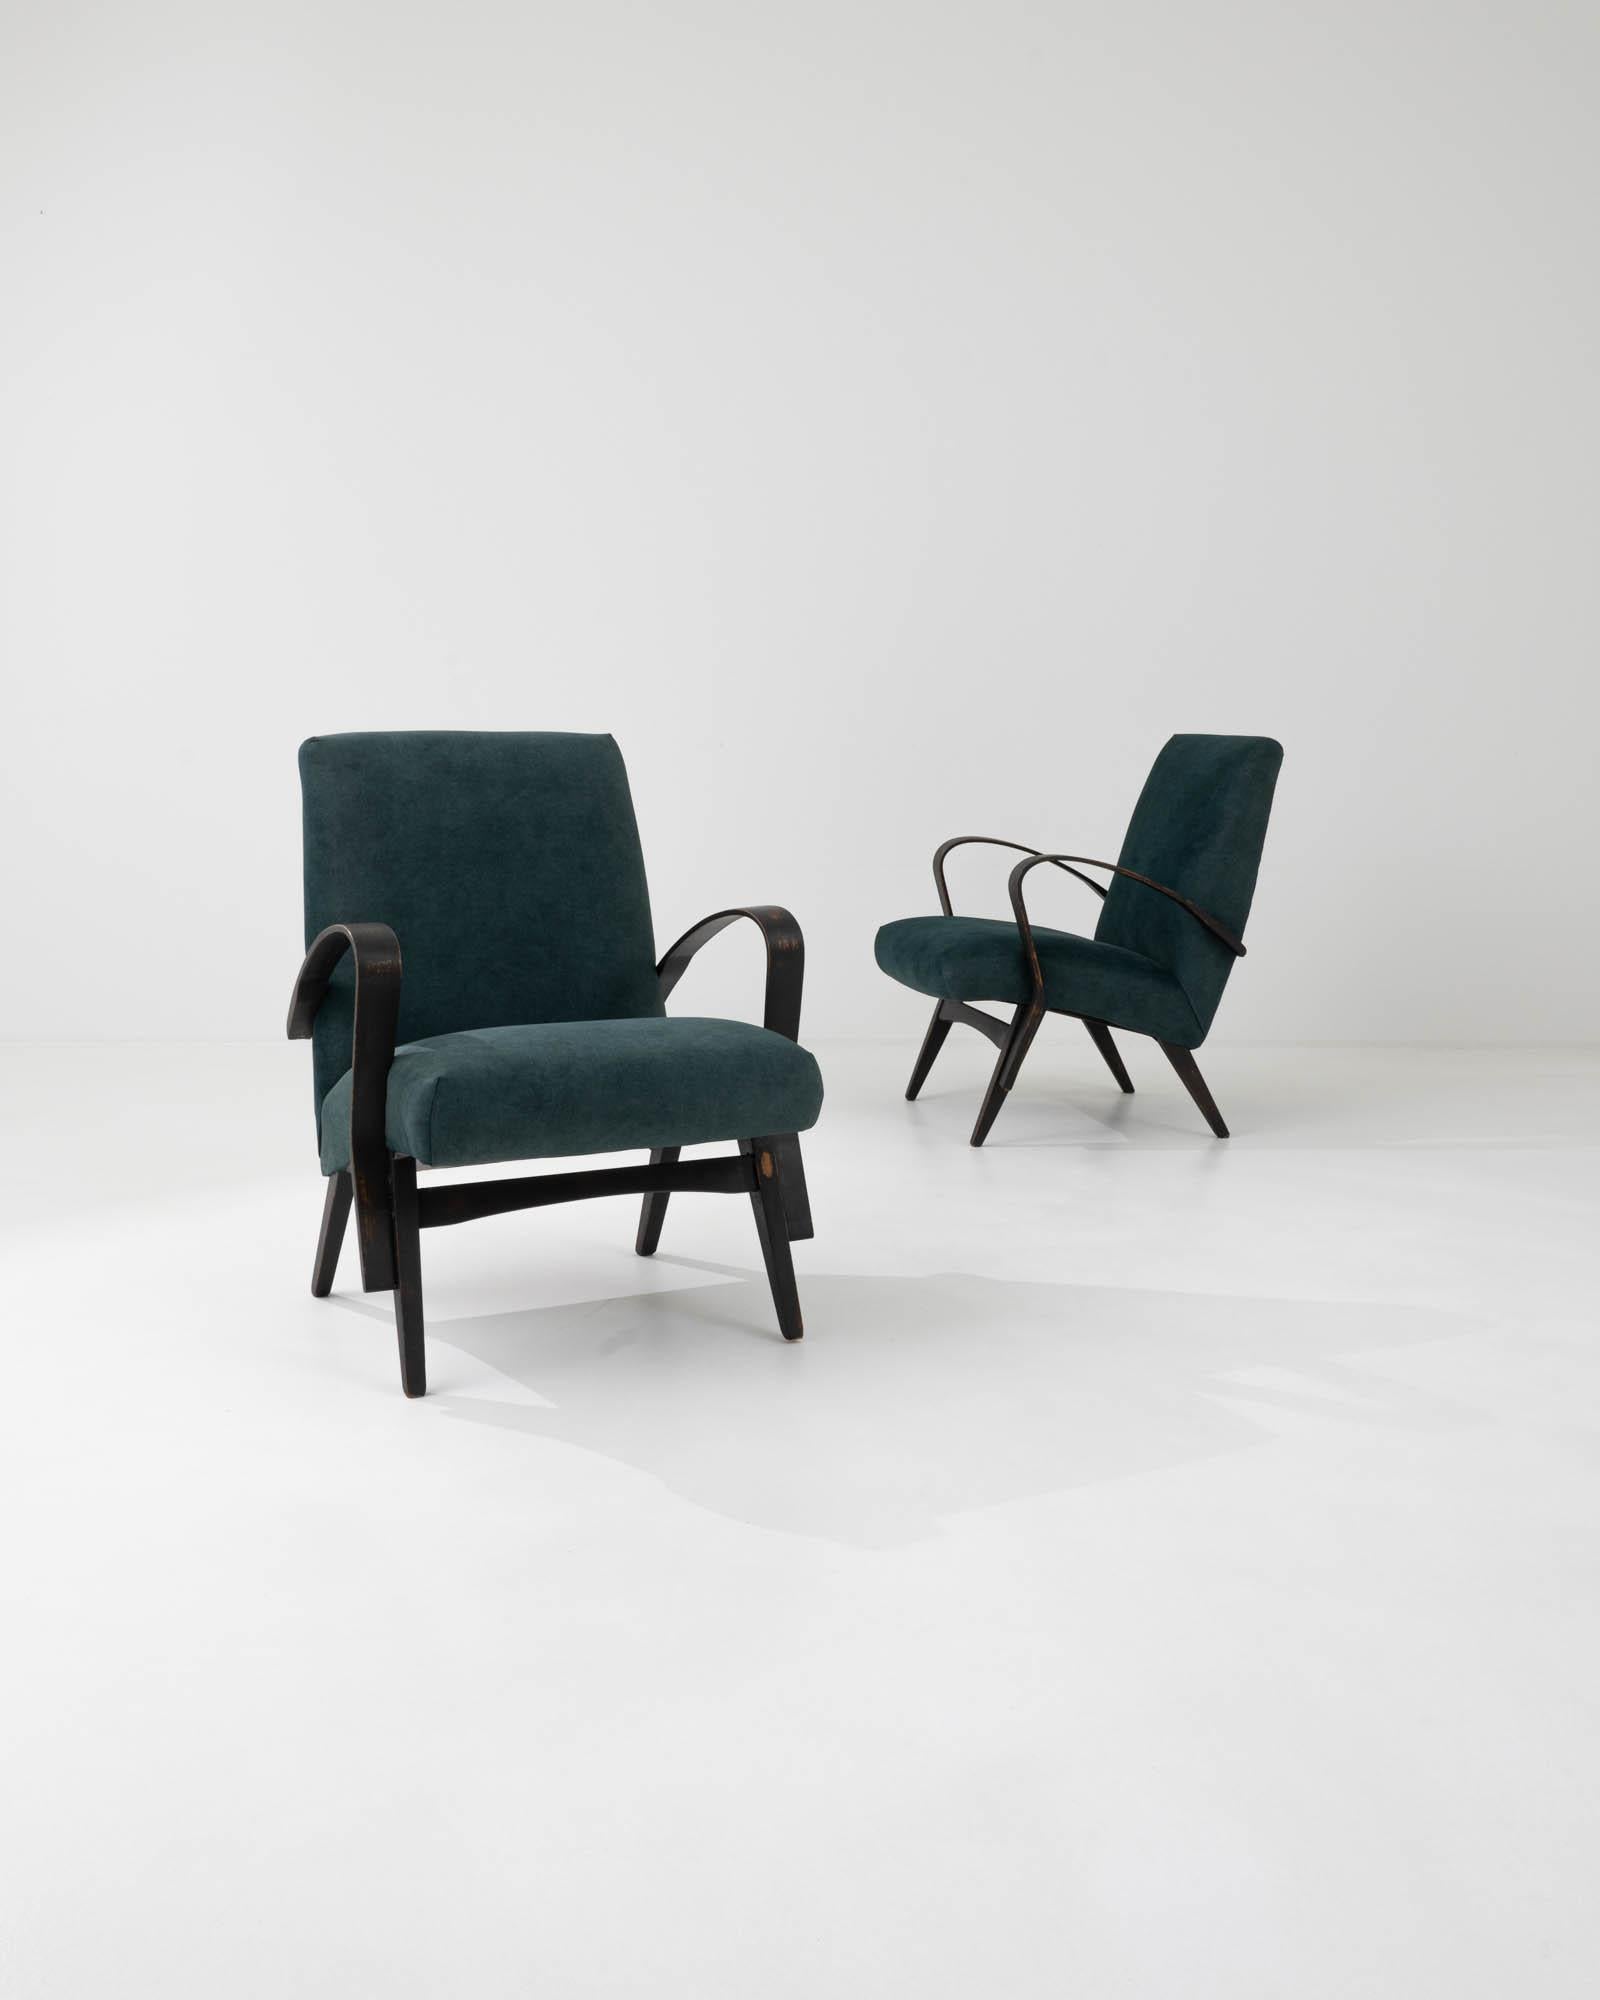 A pair of upholstered armchairs by Czech furniture manufacturer Tatra. Characterized by the clean lines that define their minimalist silhouette, these armchairs were crafted by the iconic Czech brand Tatra, and attributed to designer František Jirák